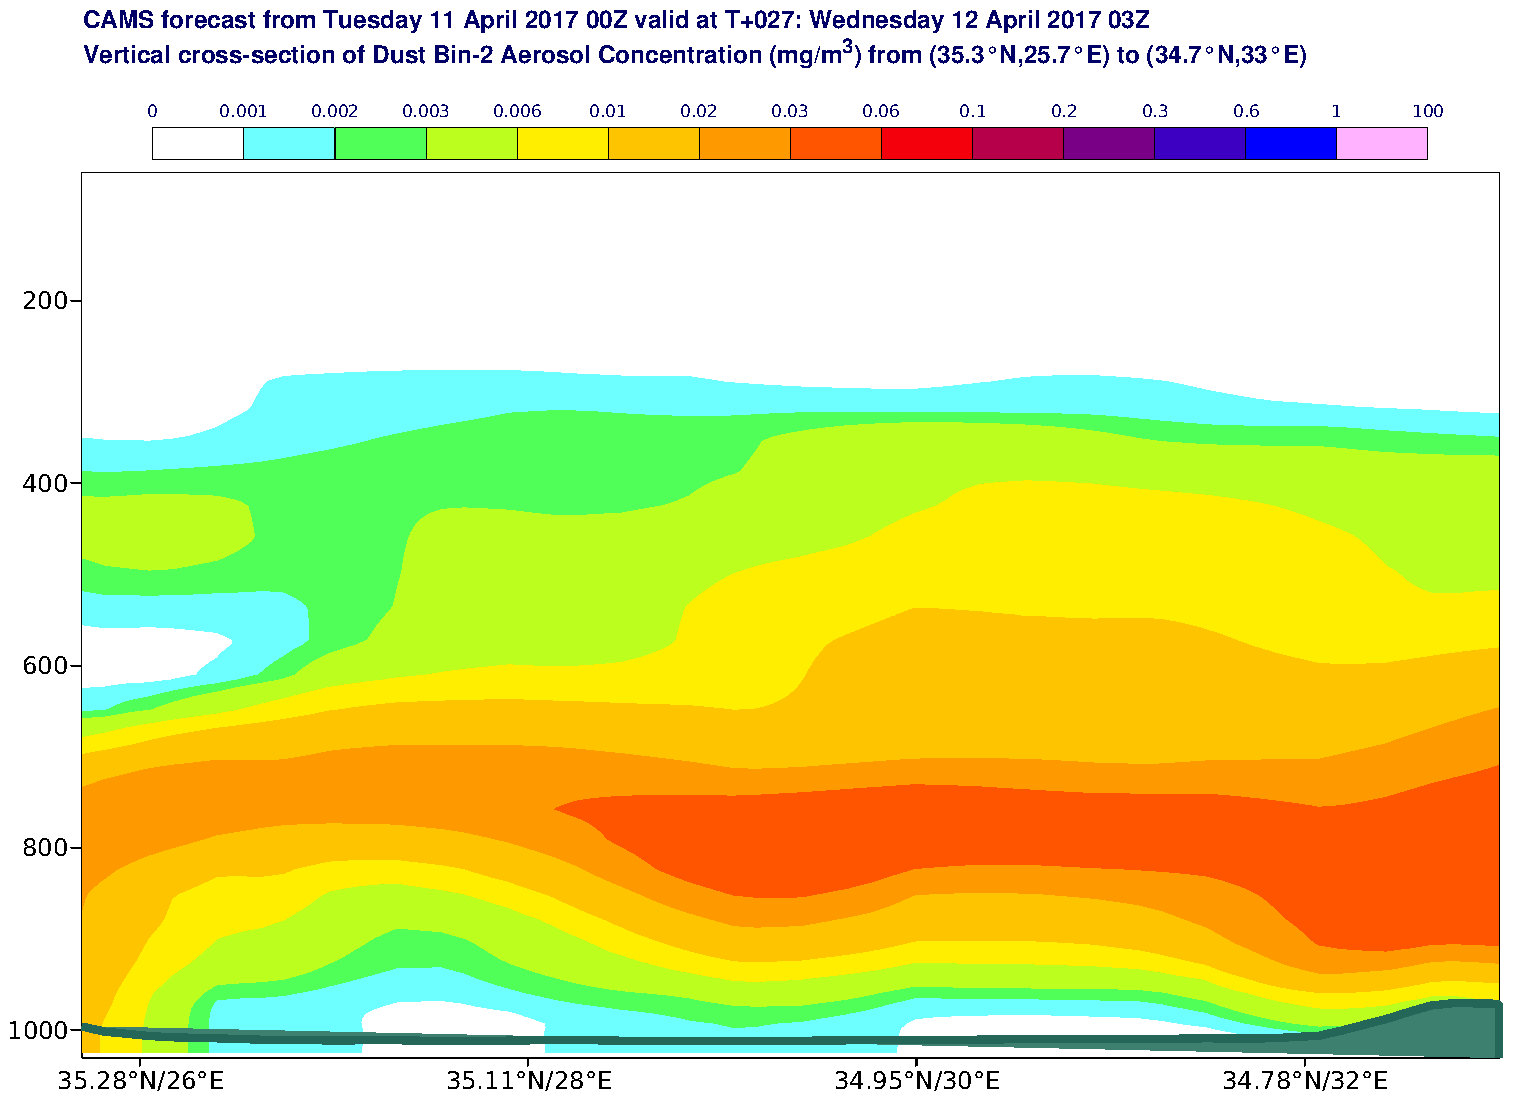 Vertical cross-section of Dust Bin-2 Aerosol Concentration (mg/m3) valid at T27 - 2017-04-12 03:00